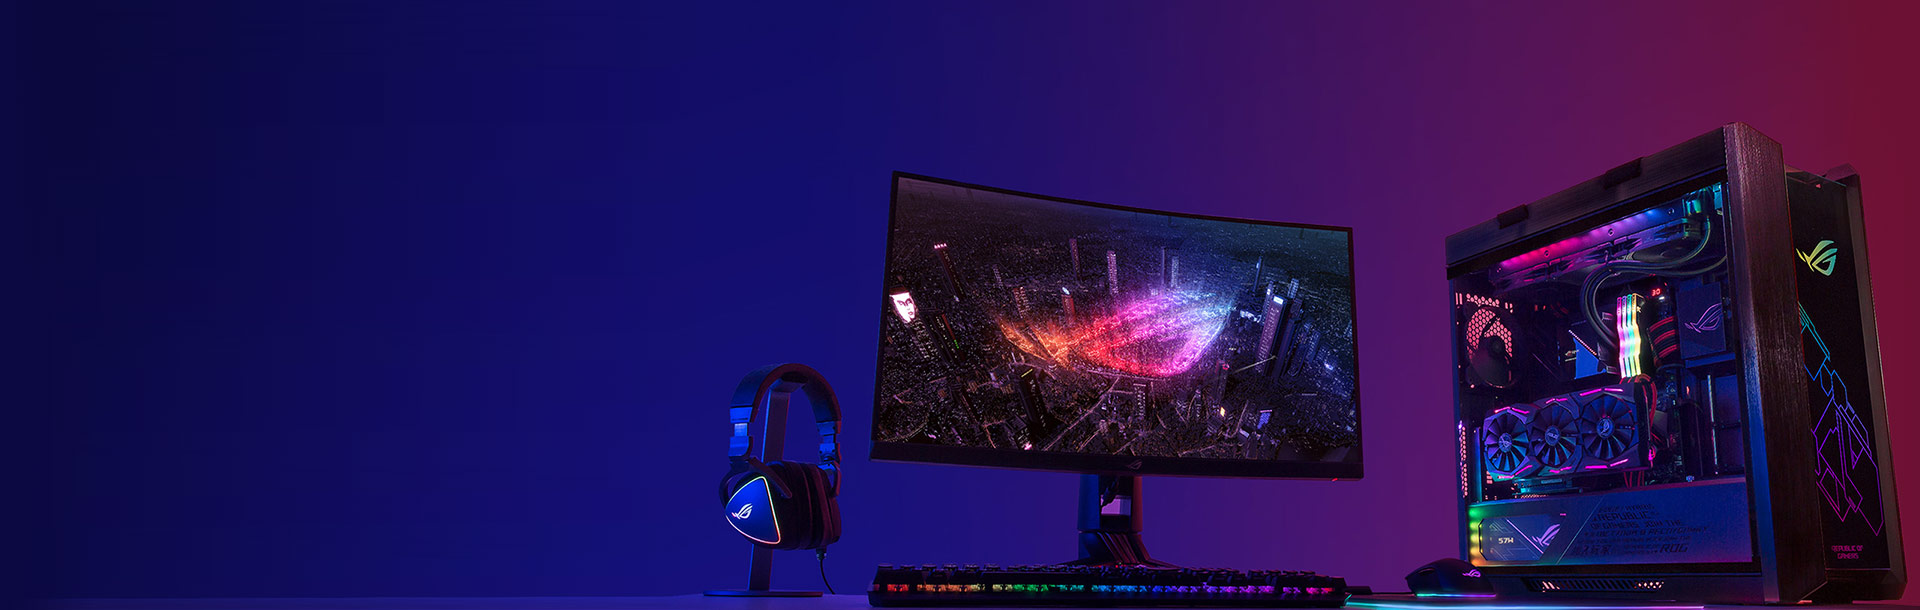 ROG Strix Z690-I Gaming WiFi features diverse ROG ecosystem